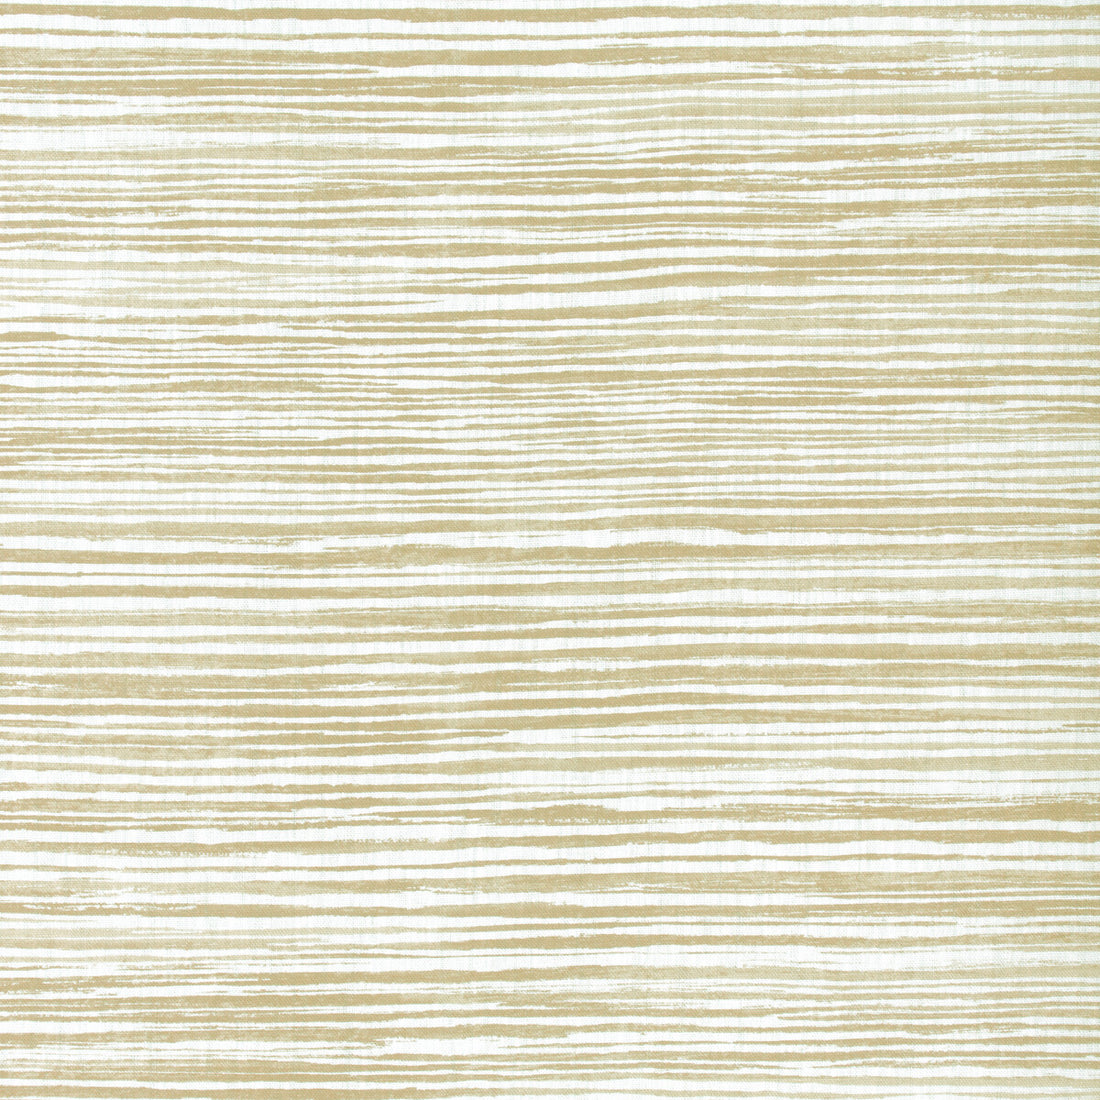 Landlines fabric in tan color - pattern LANDLINES.161.0 - by Kravet Basics in the Small Scale Prints collection